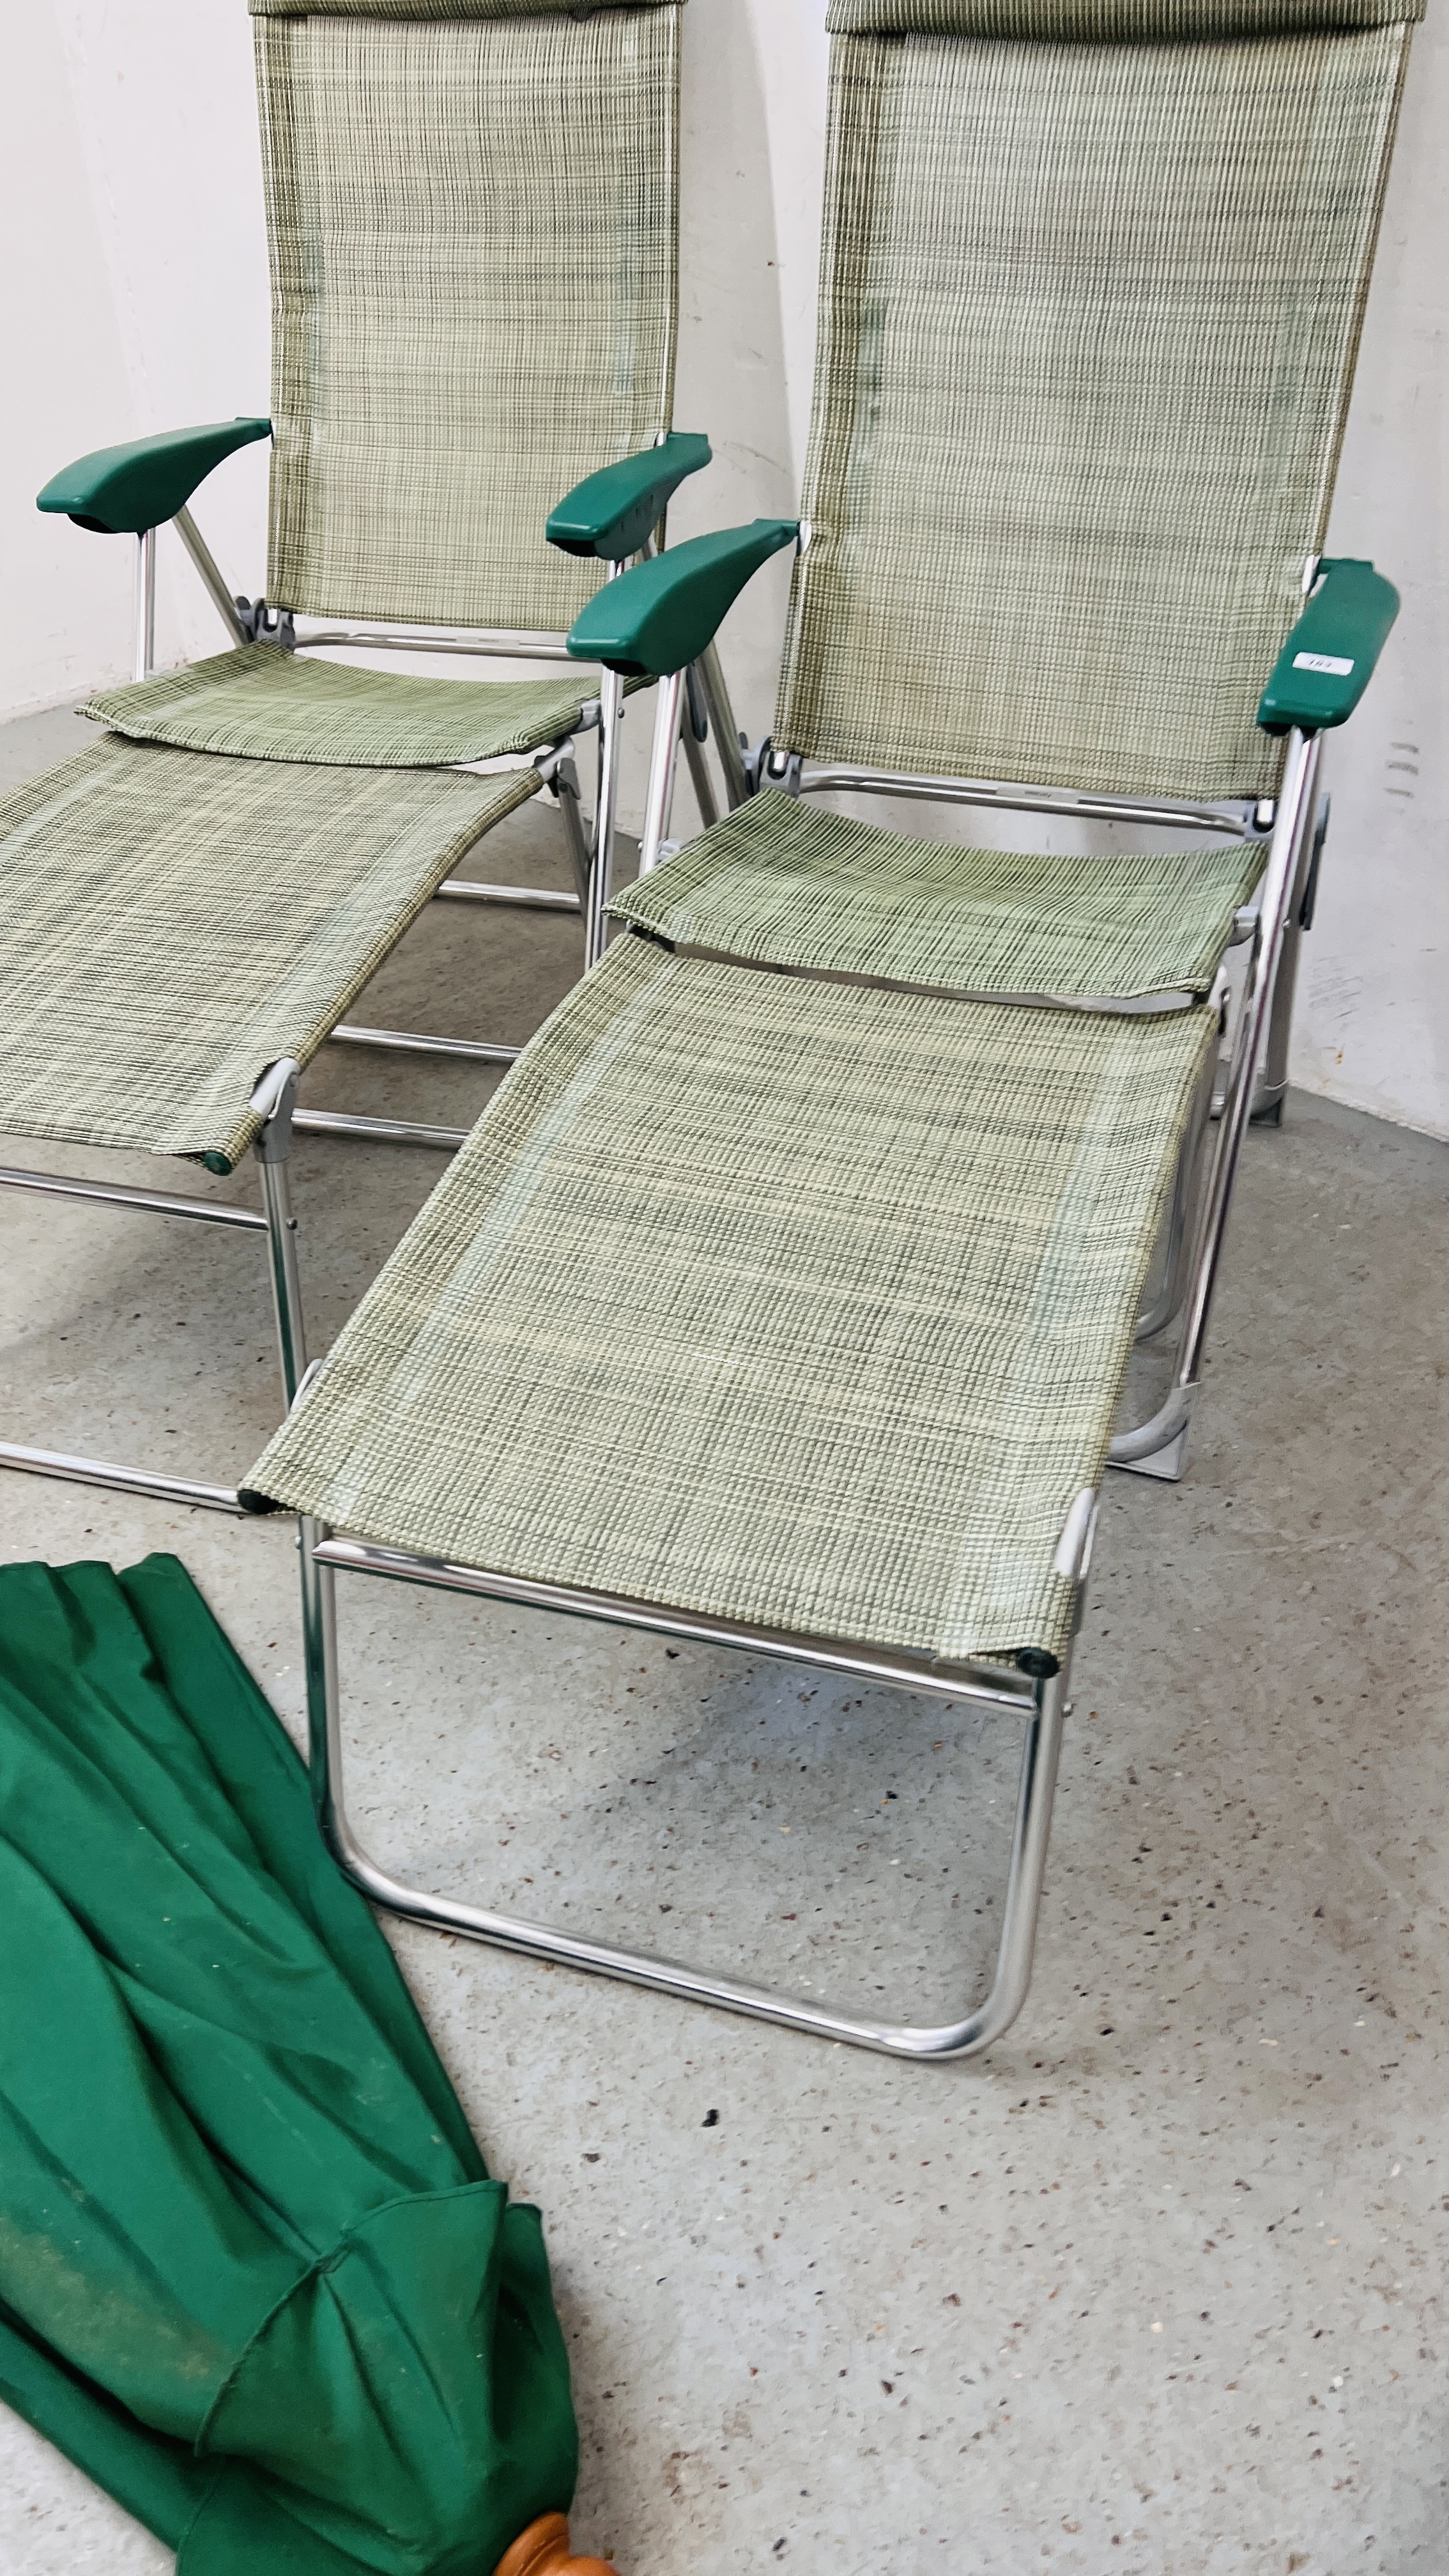 A PAIR OF ALUMINIUM FRAMED FOLDING SUN CHAIRS WITH MATCHING FOLDING FOOT RESTS AND GARDEN PARASOL. - Image 3 of 10